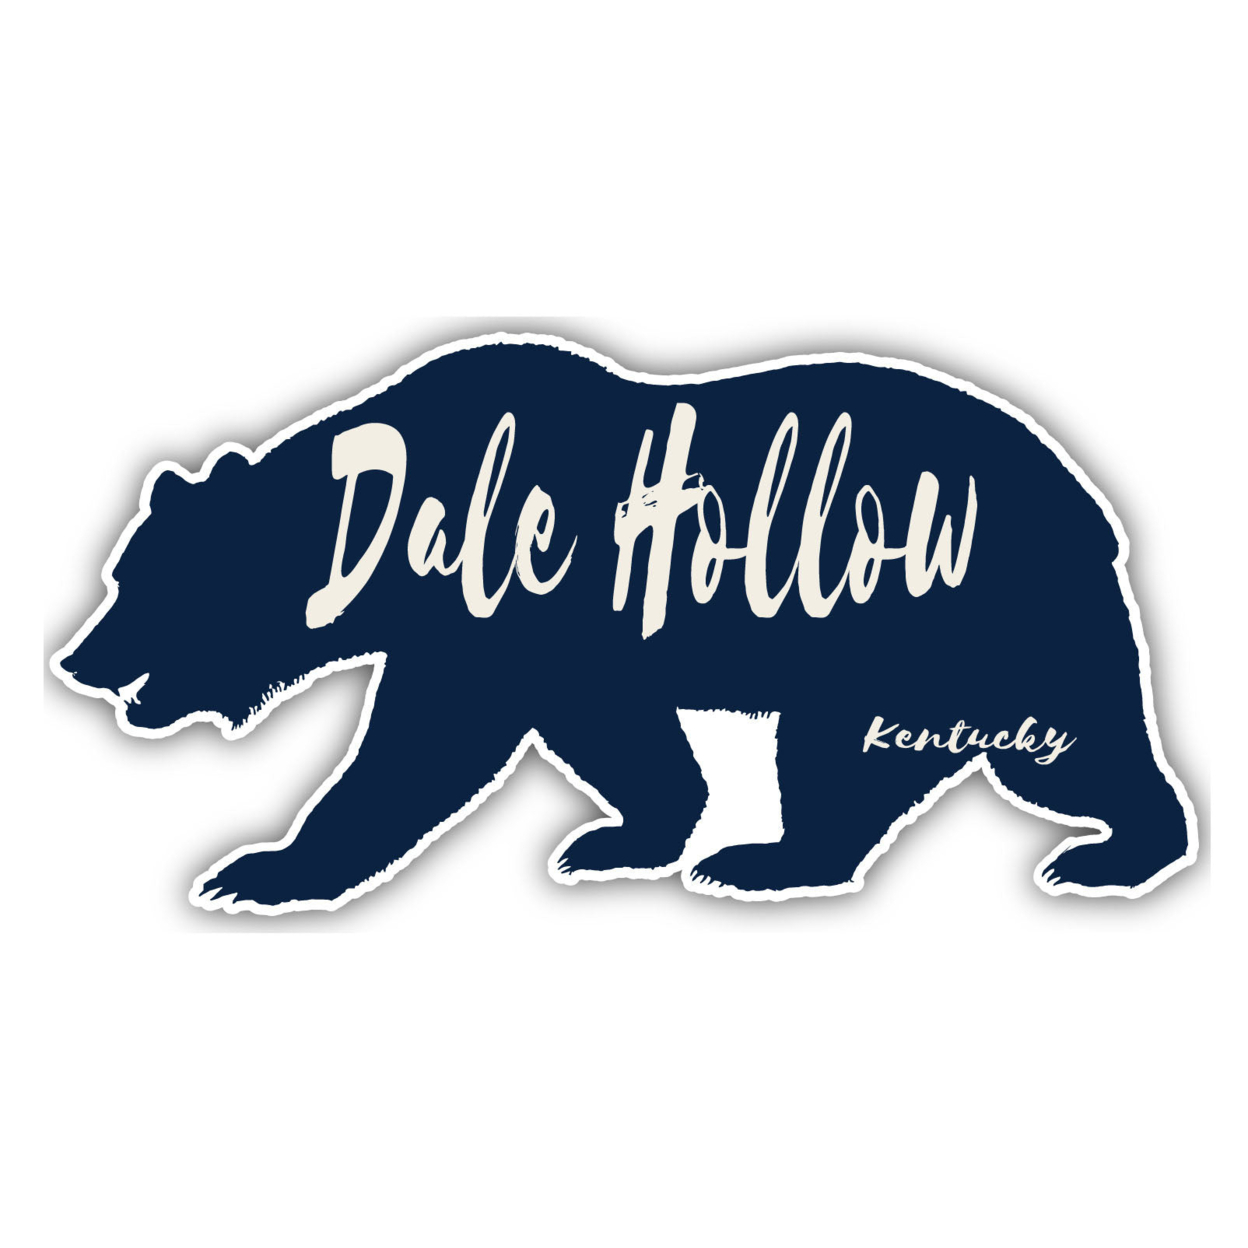 Dale Hollow Kentucky Souvenir Decorative Stickers (Choose Theme And Size) - 4-Pack, 12-Inch, Bear